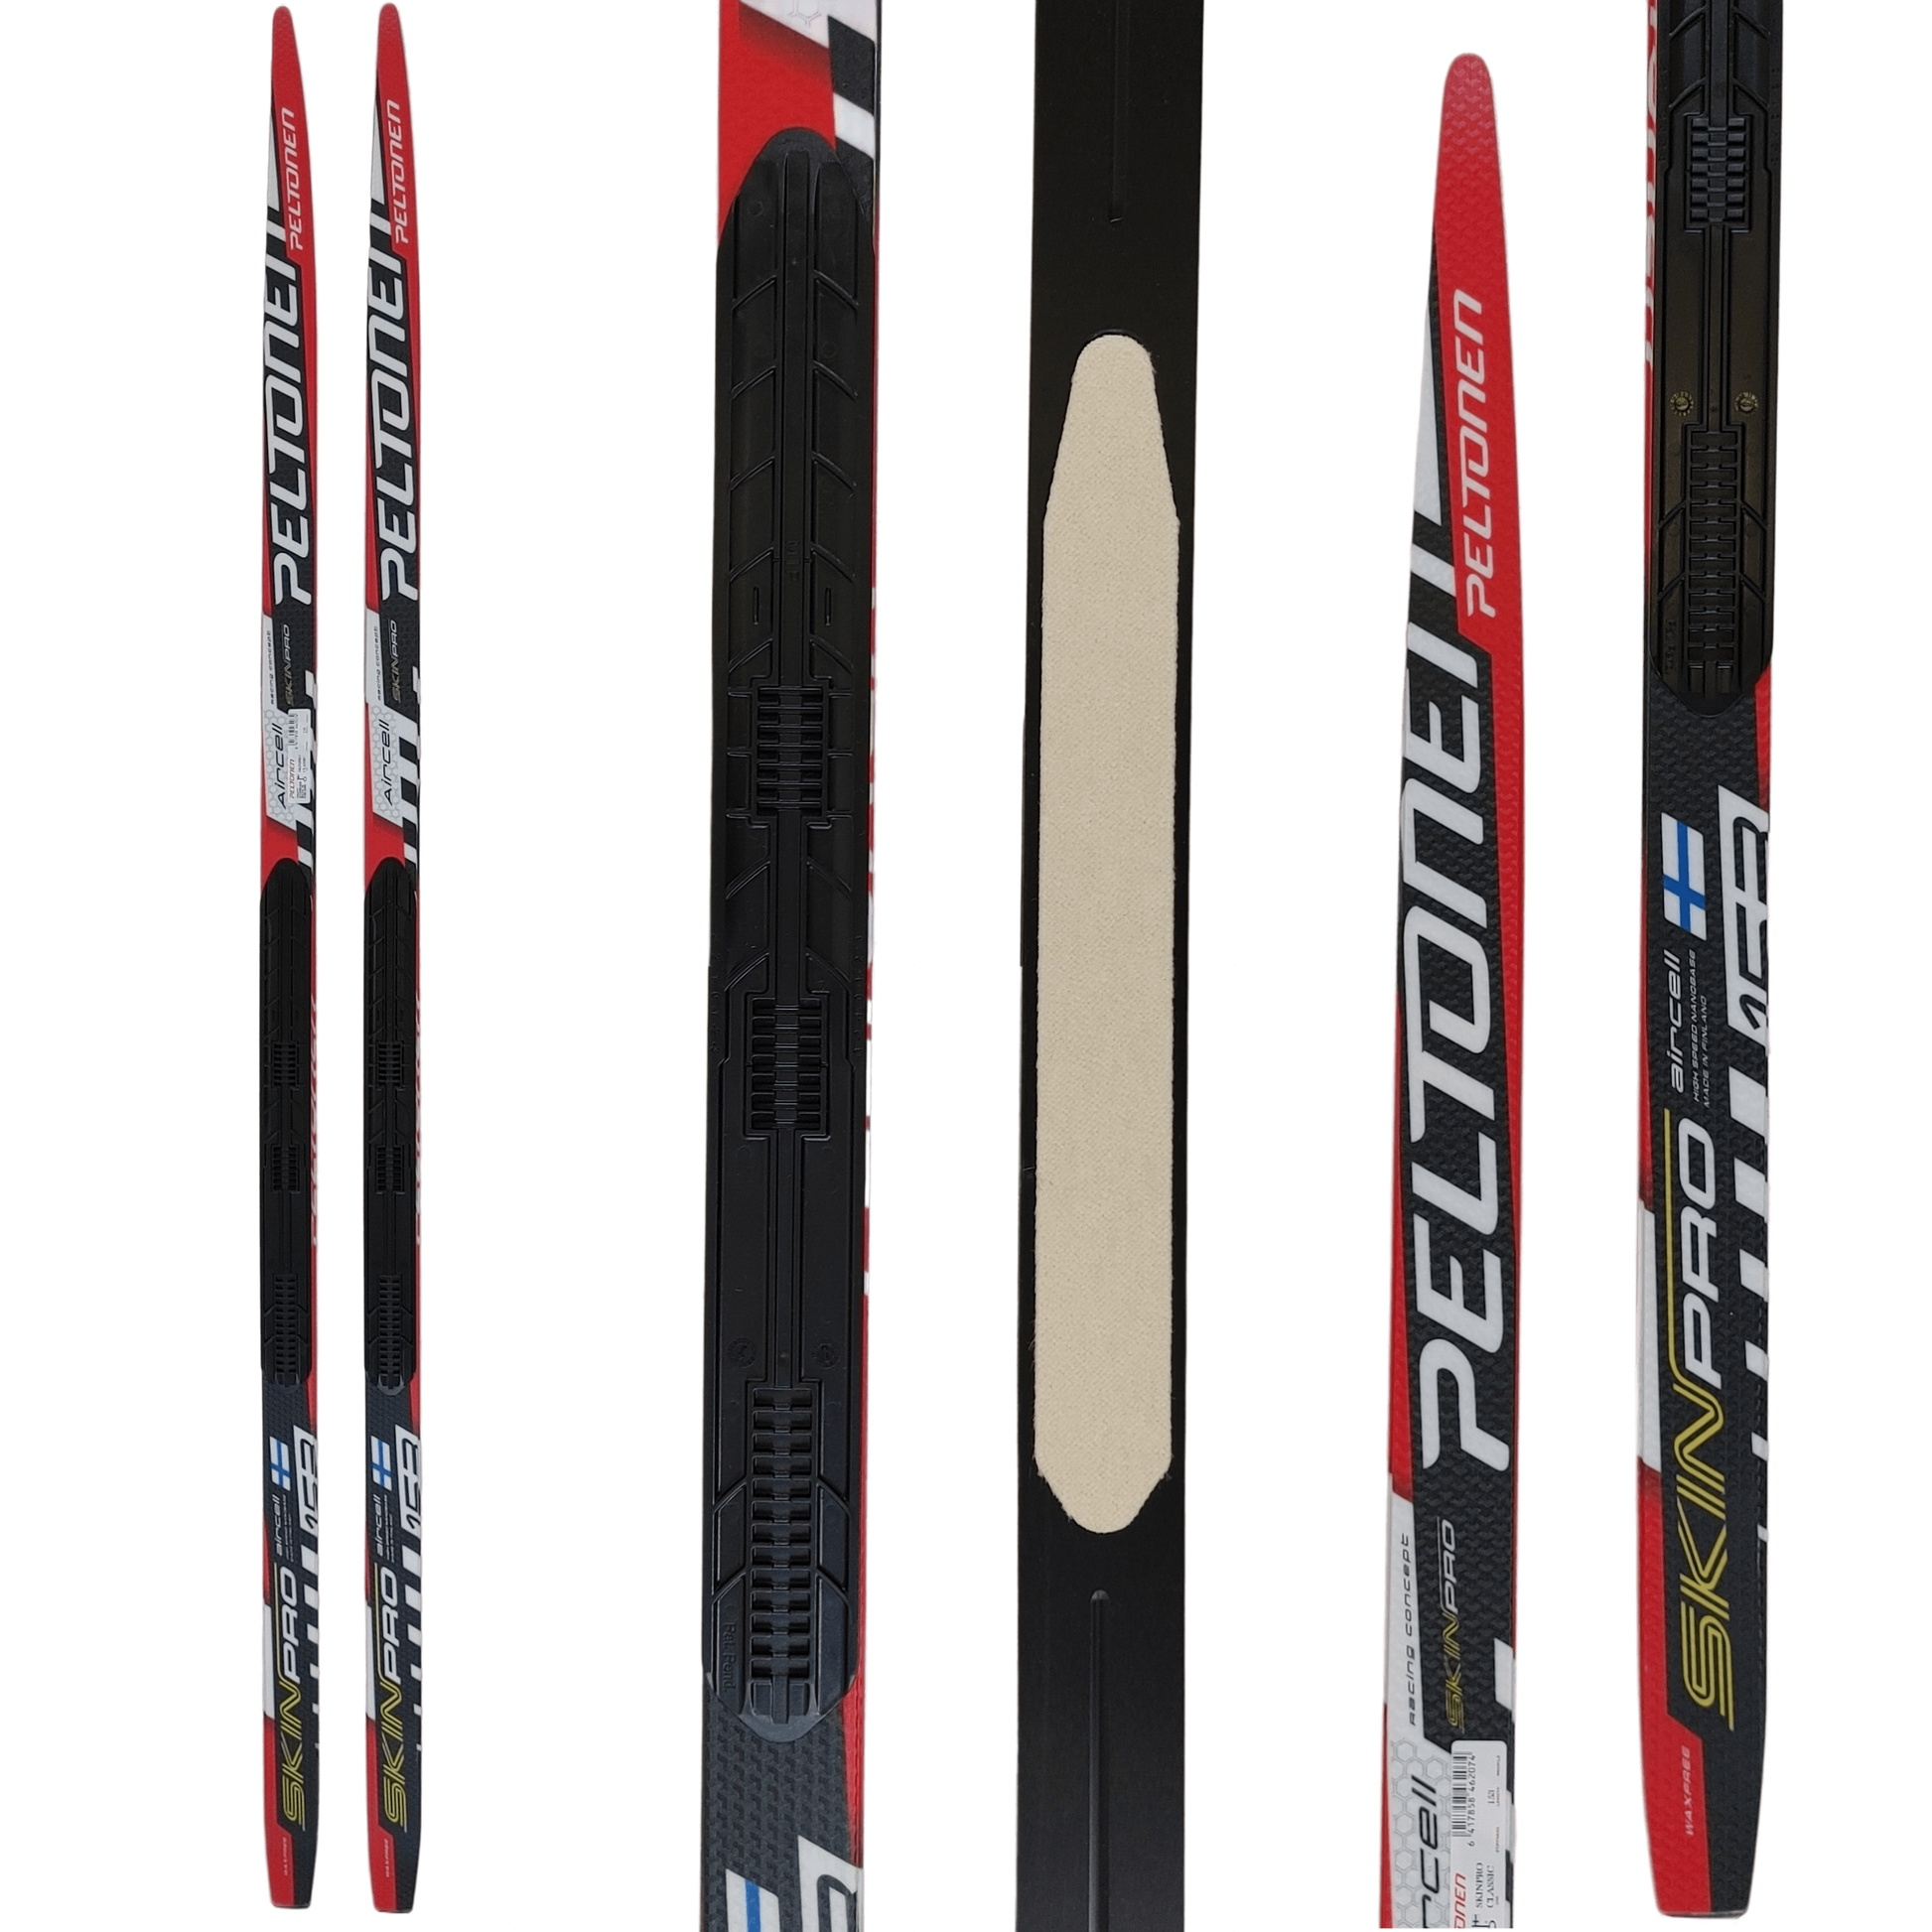 A product picture of the Peltonen SkinPro LW 2016 153cm Standard Flex NIS-1.0 Classic Skis CLEARANCE